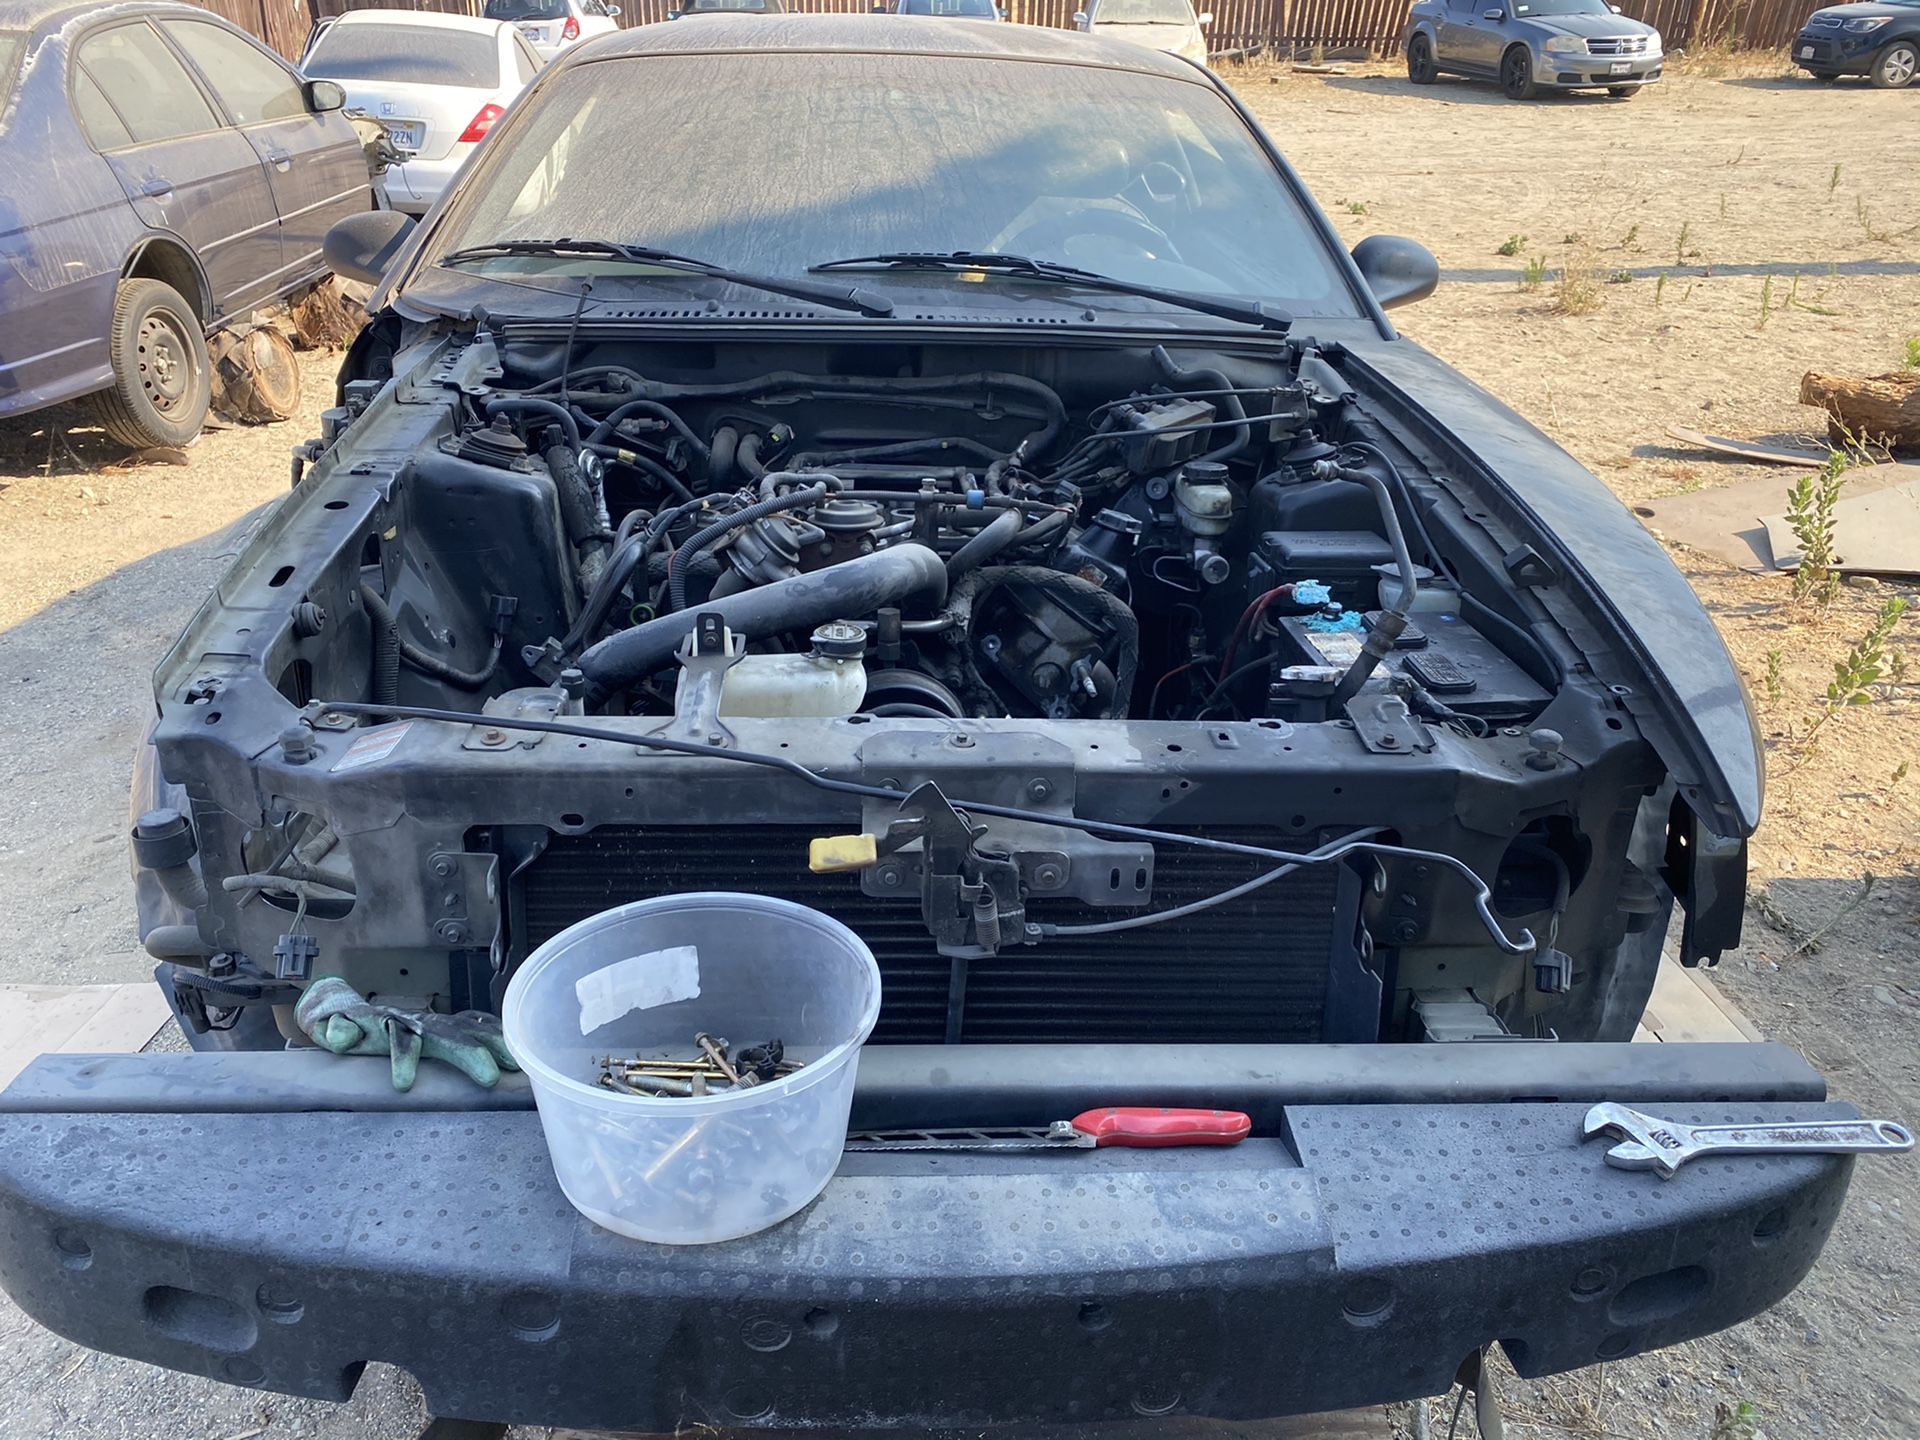 4th Generation Mustang used parts Available 99- 2000 3.8 V6